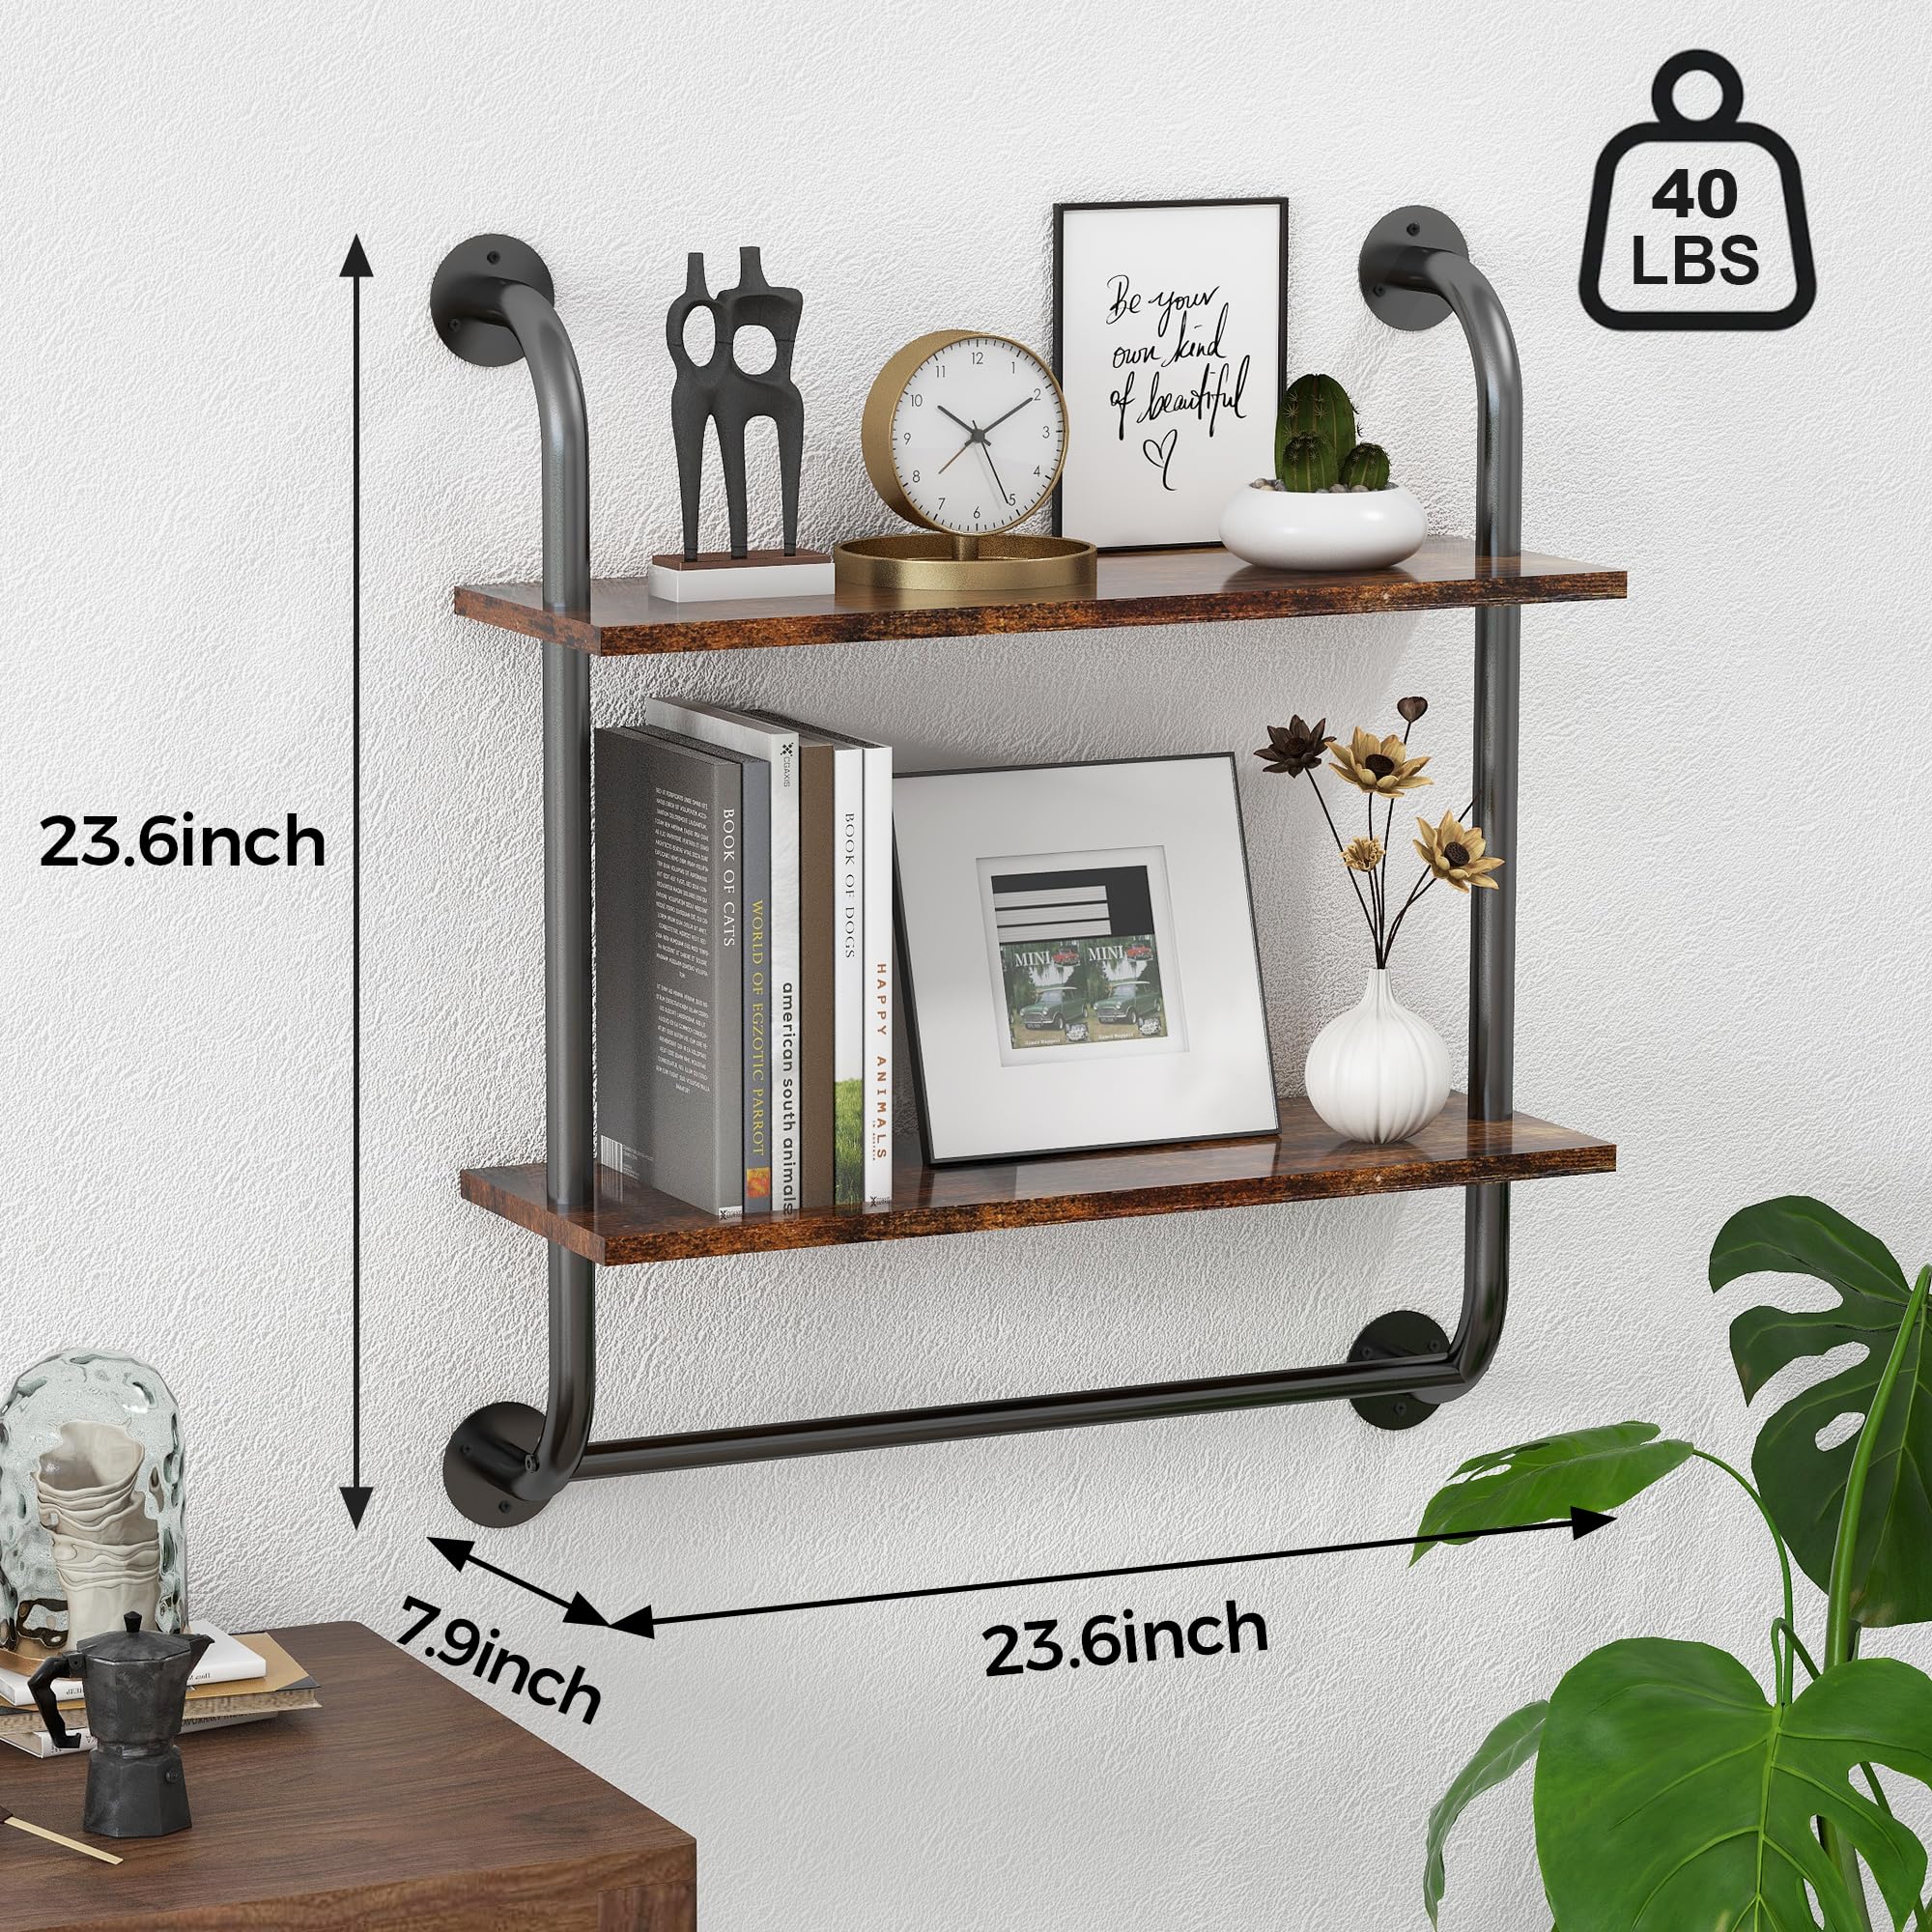 2 Tier 24 Inch Bathroom Wall Shelf with Towel Bar, Rustic Industrial Pipe Shelves for Wall